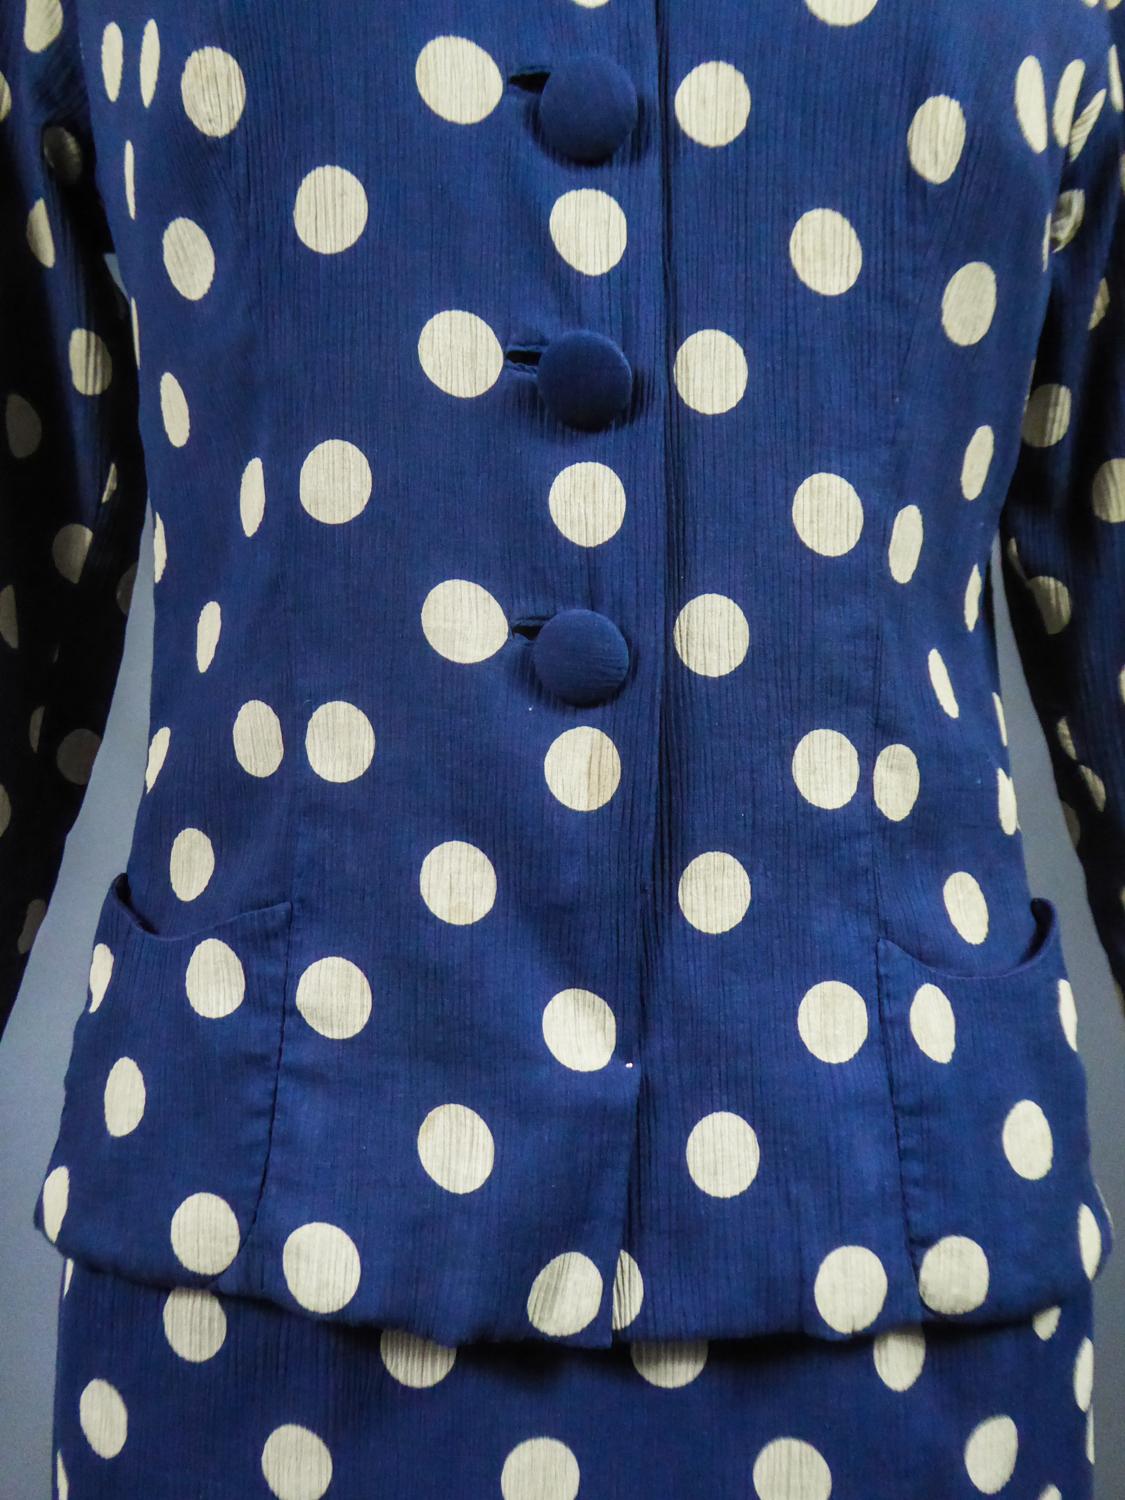 Women's An French Skirt Suit in Polkadot Silk Crepe By F. Dubois Circa 1965 For Sale